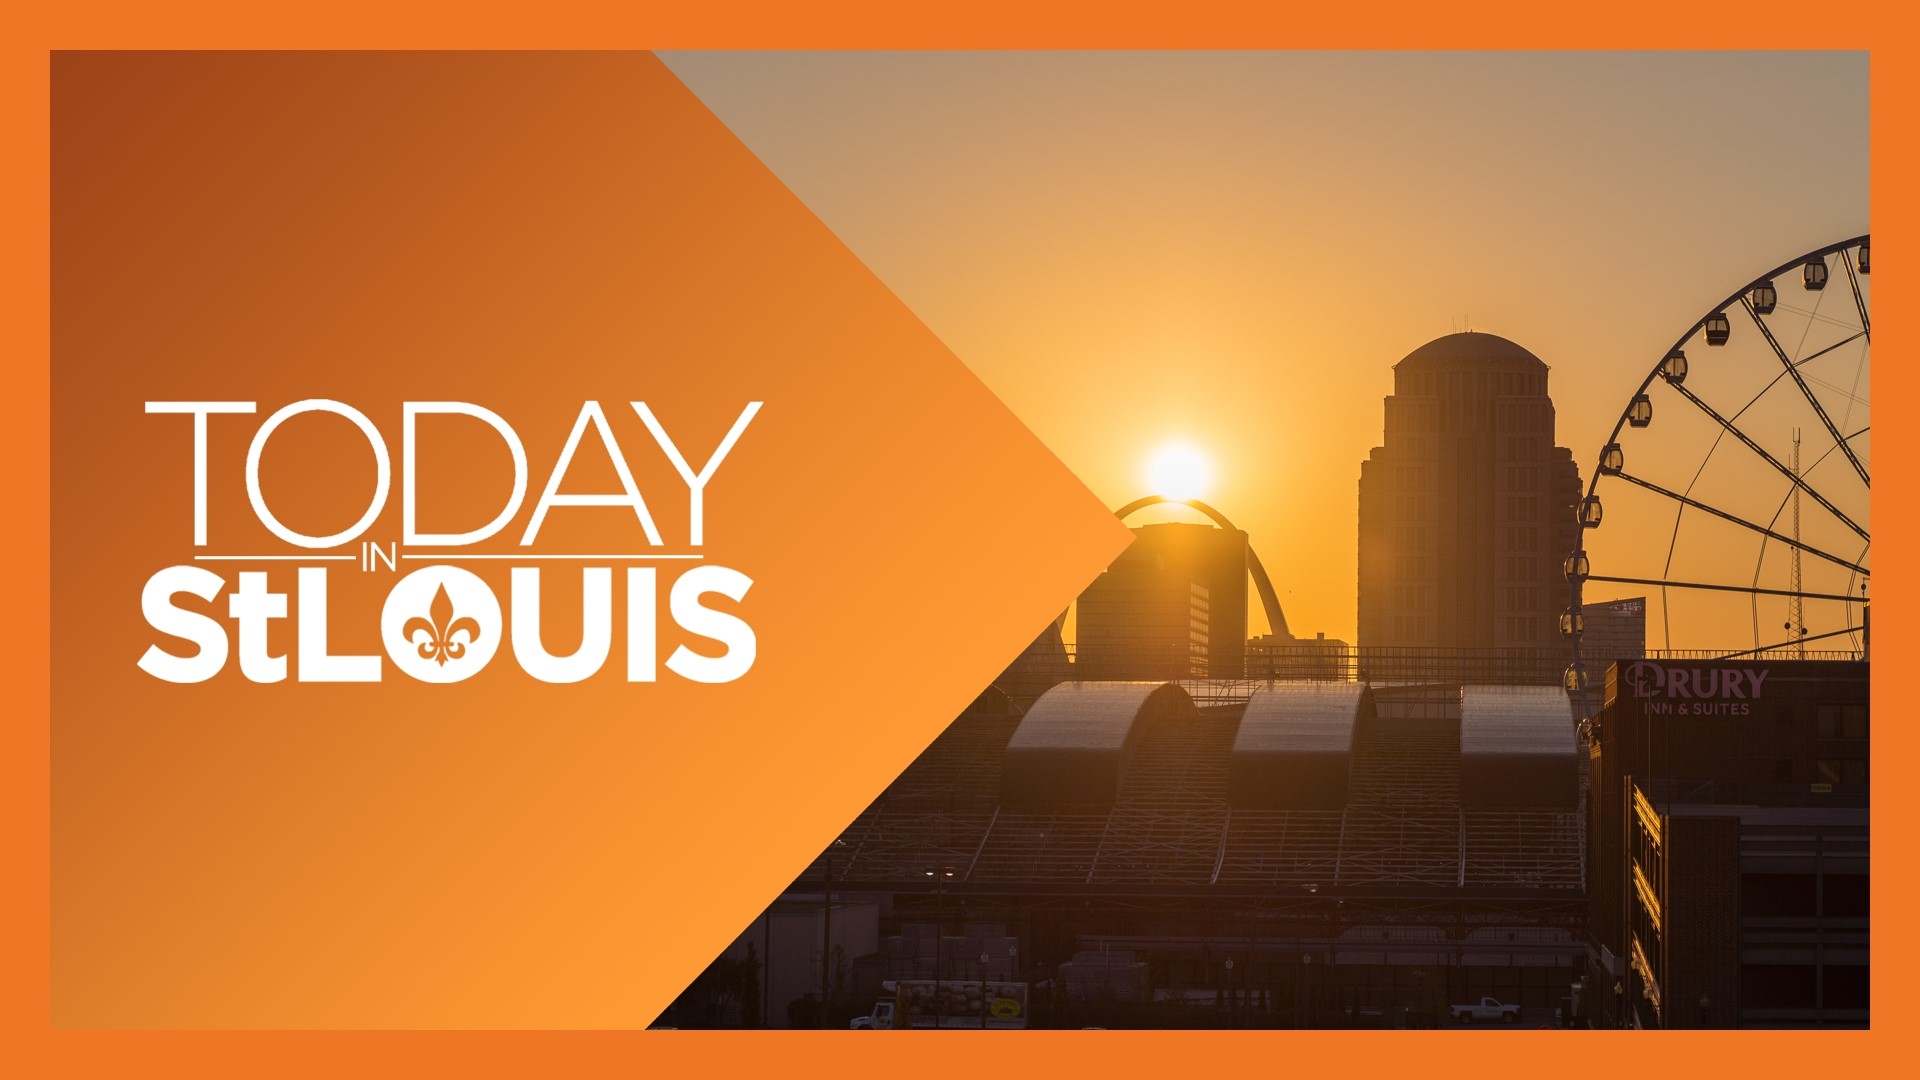 Your place for local St. Louis news each morning. See what happened overnight and get the weather forecast to help you plan your day.